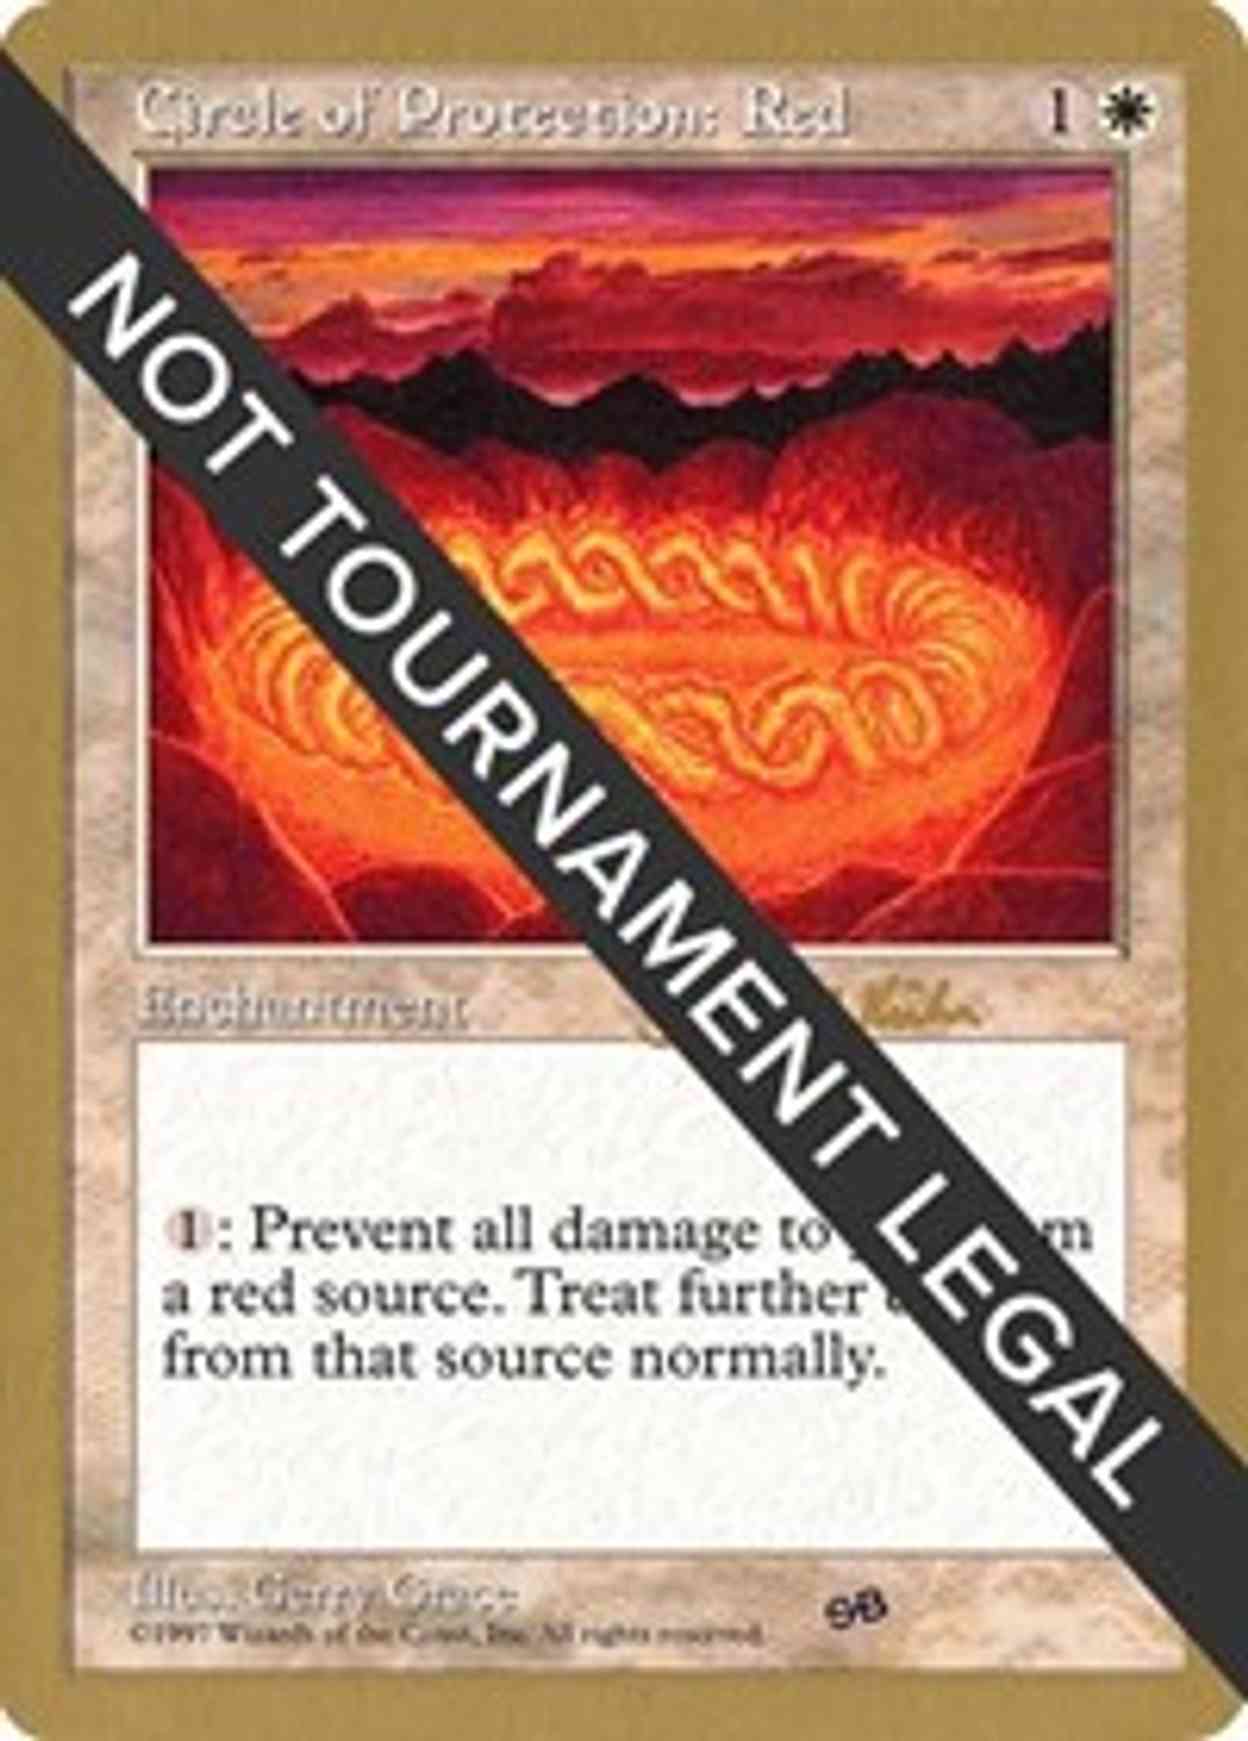 Circle of Protection: Red - 1997 Janosch Kuhn (5ED) (SB) magic card front